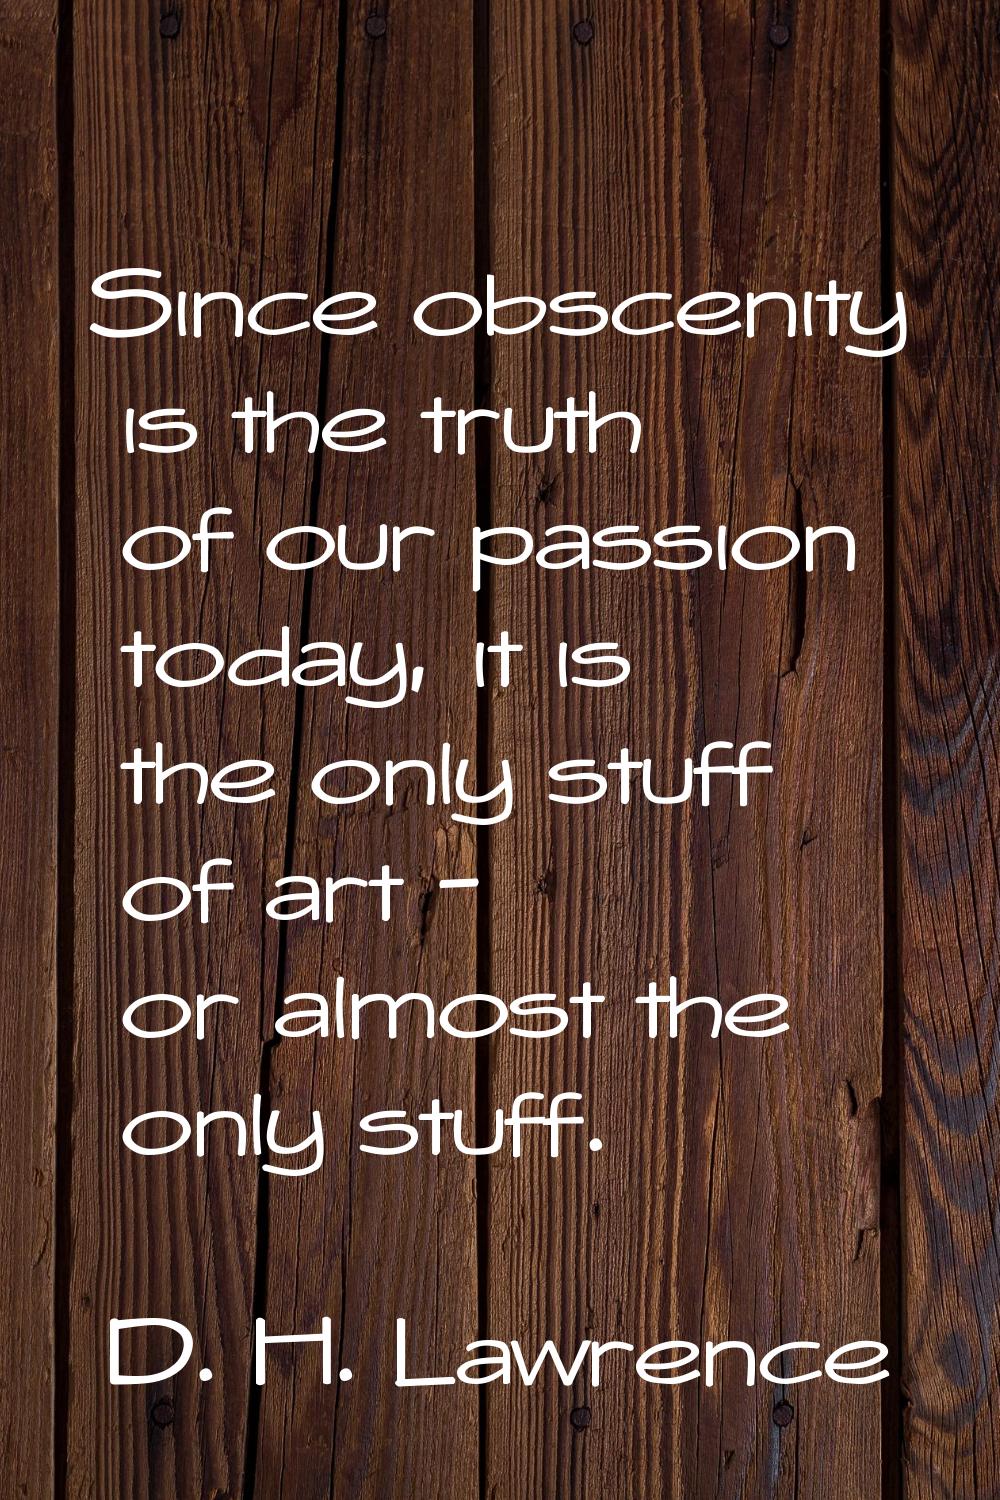 Since obscenity is the truth of our passion today, it is the only stuff of art - or almost the only